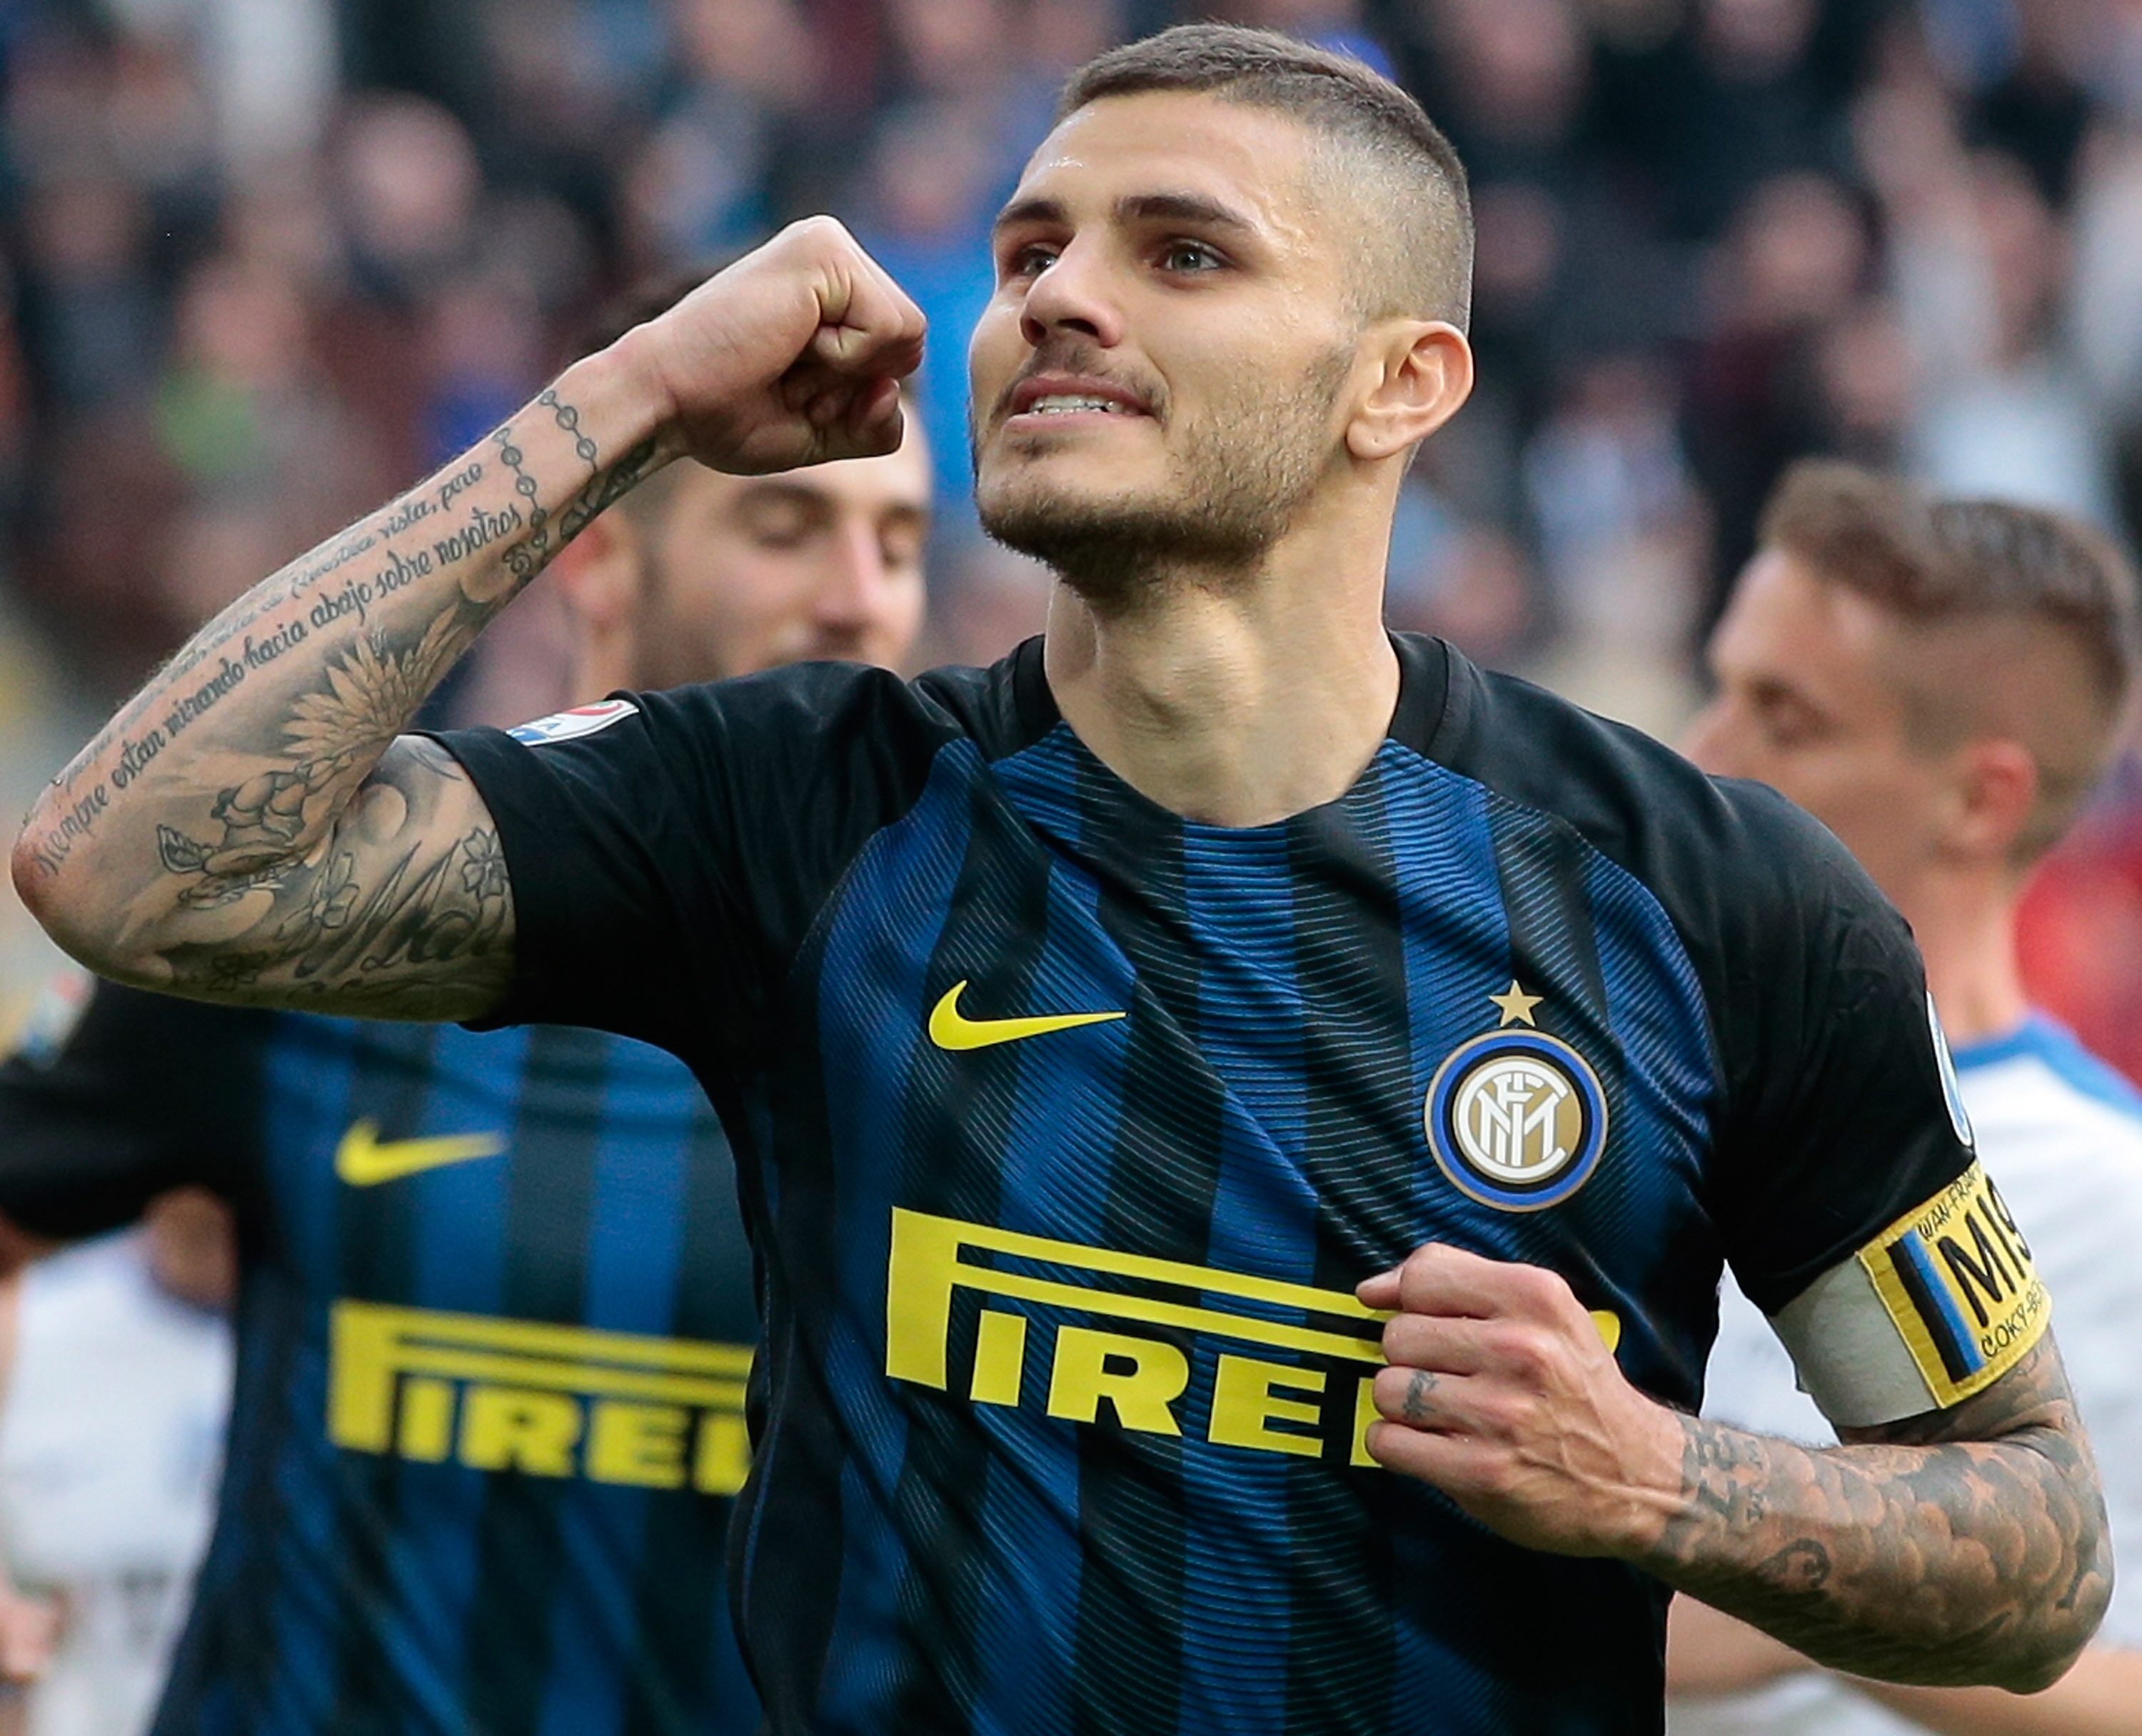 Icardi to IC: “My job is to stretch the defense – Many people don’t see that from the outside.”